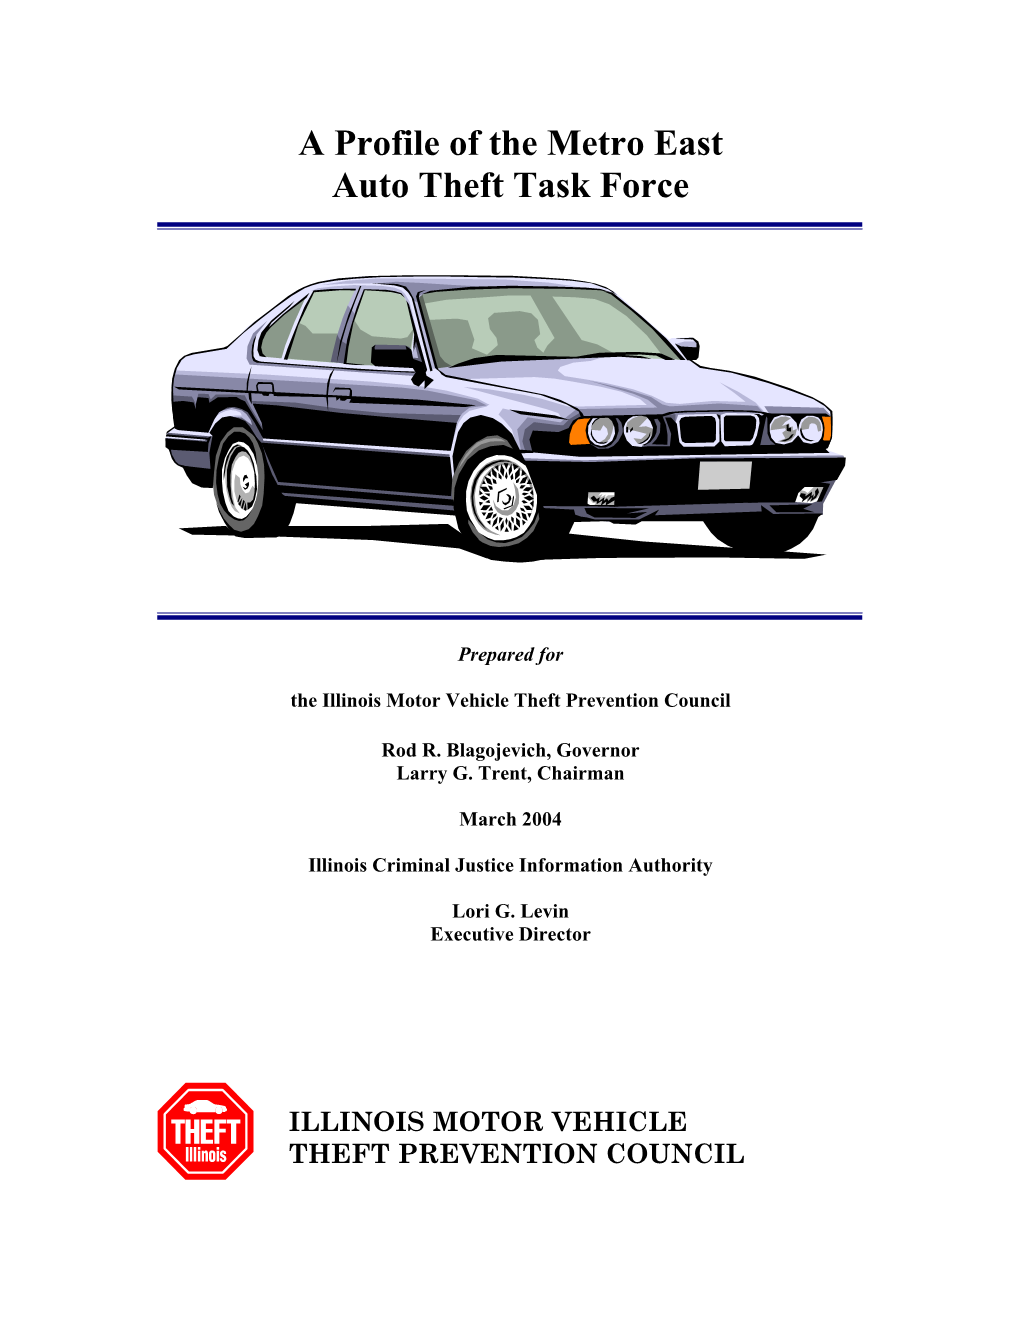 A Profile of the Metro East Auto Theft Task Force